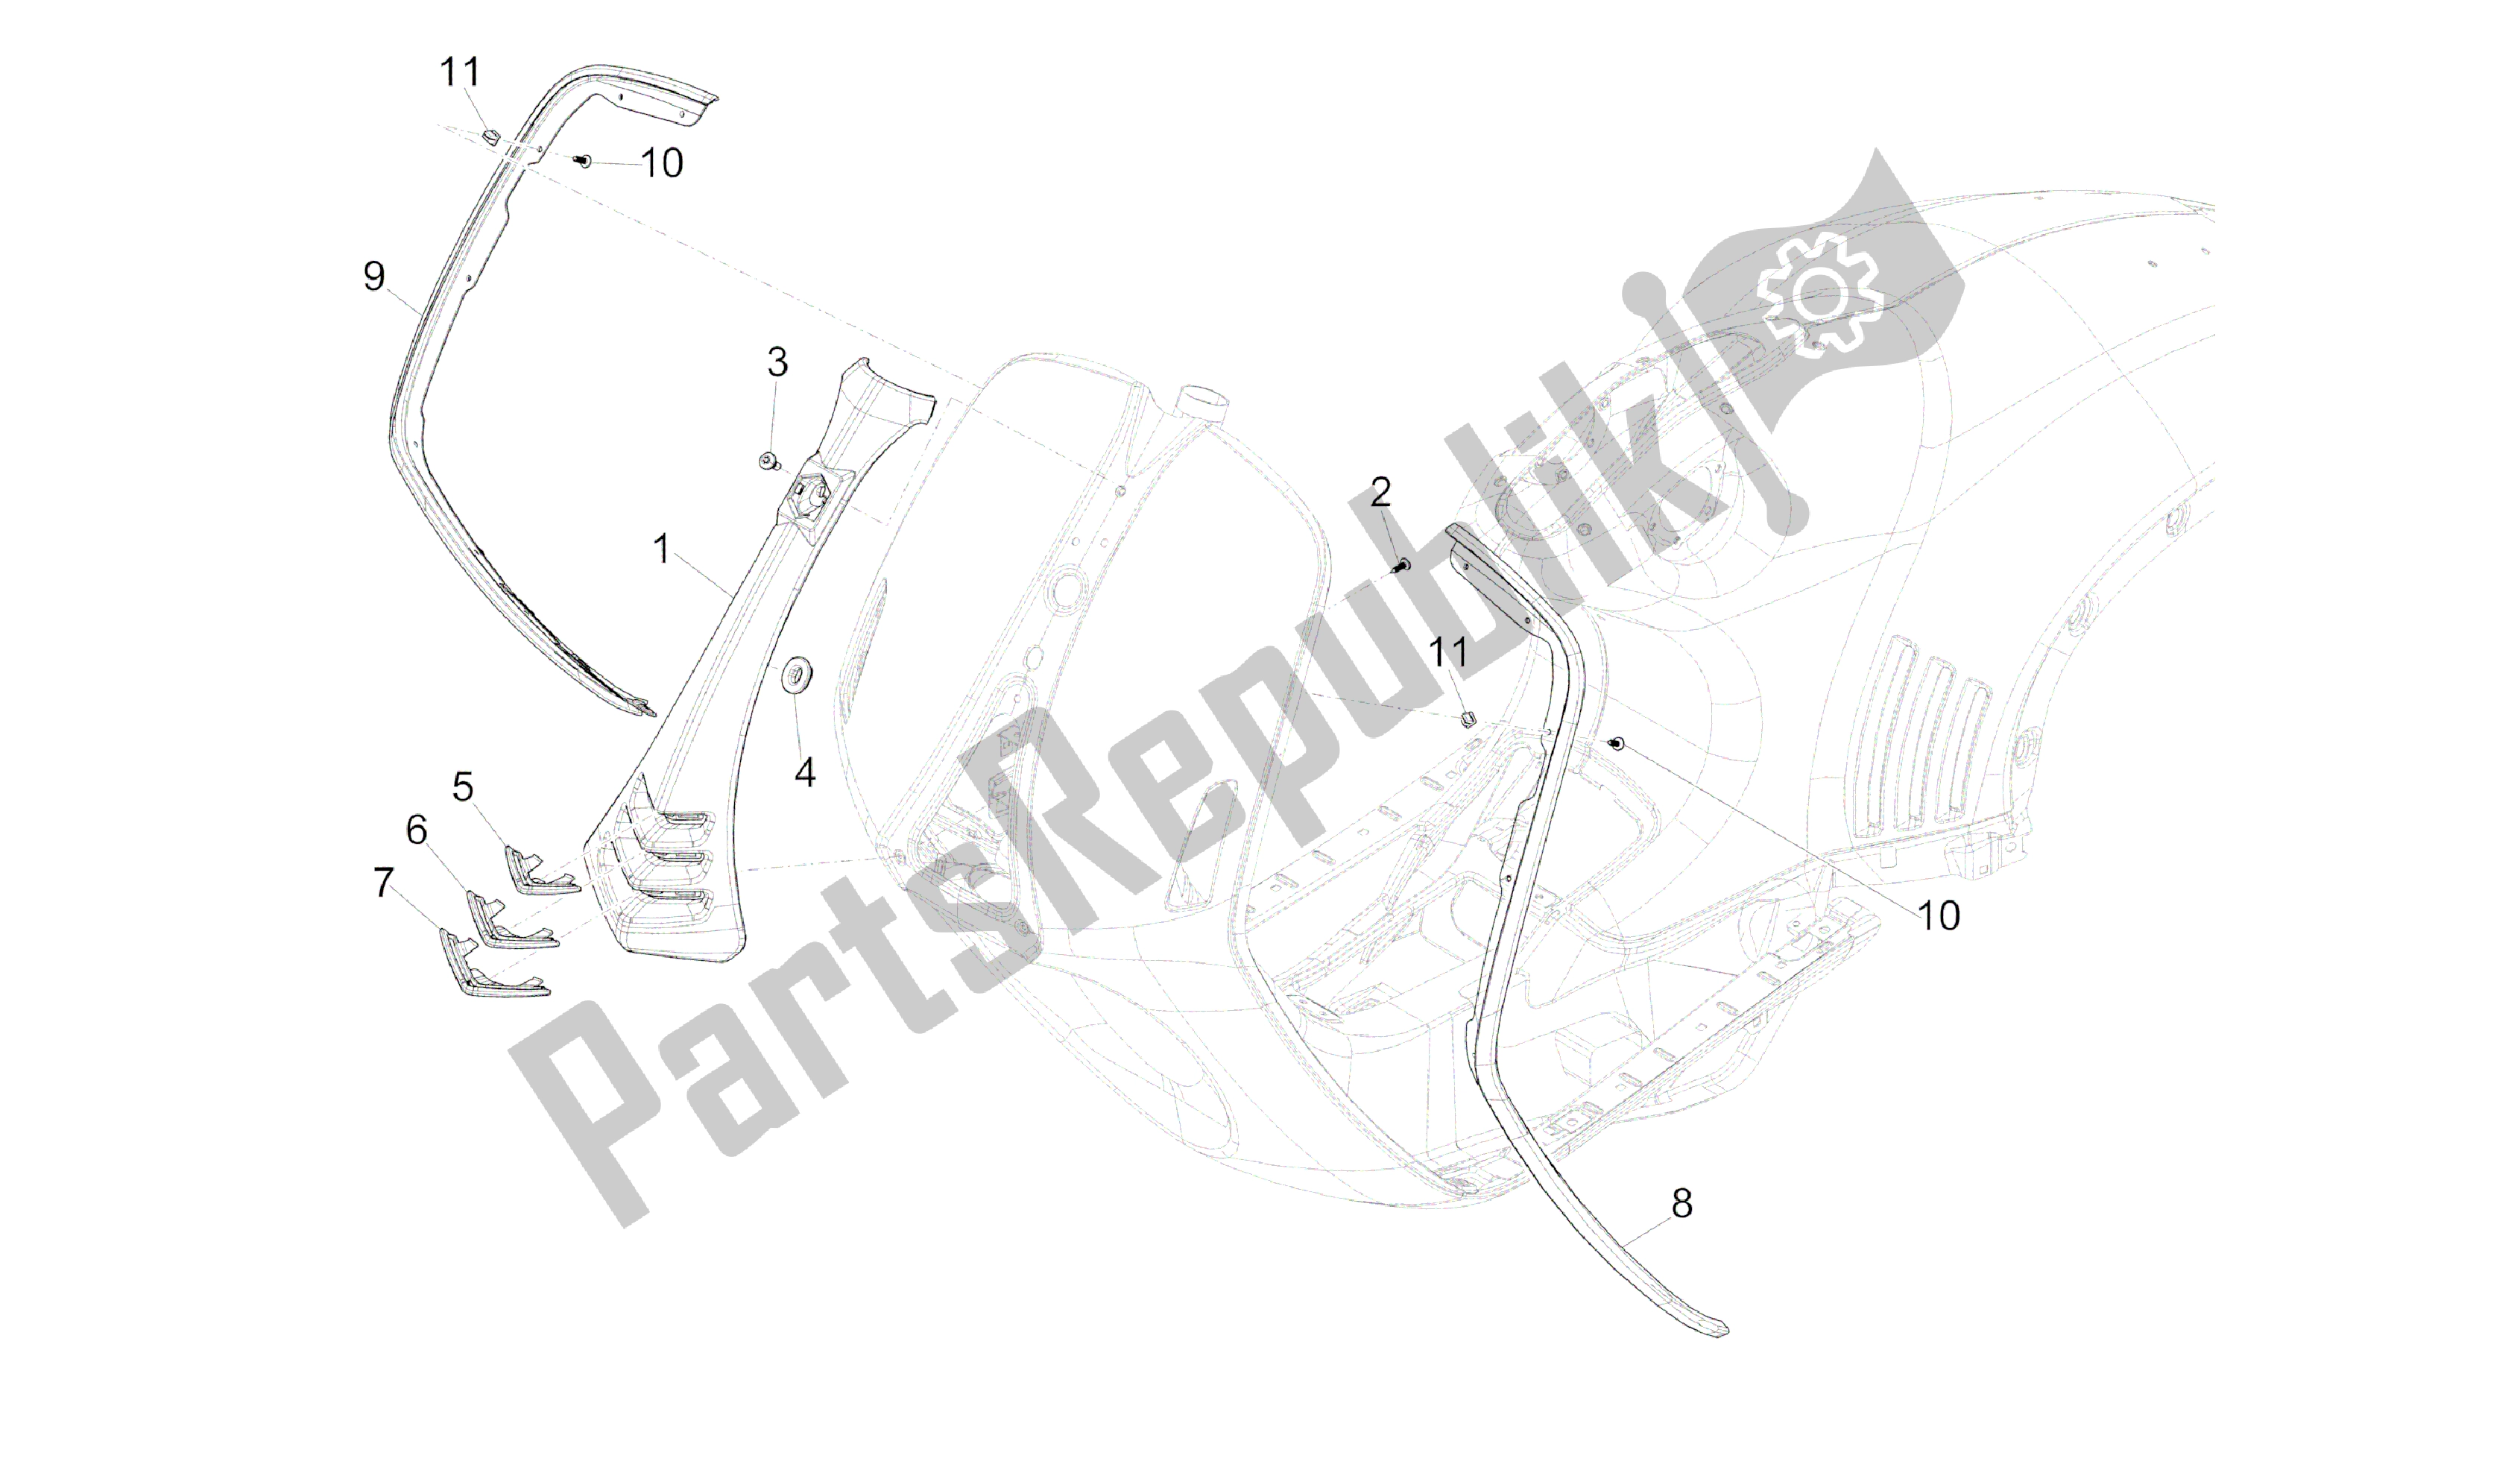 All parts for the Front Shield of the Vespa 946 150 2013 - 2014